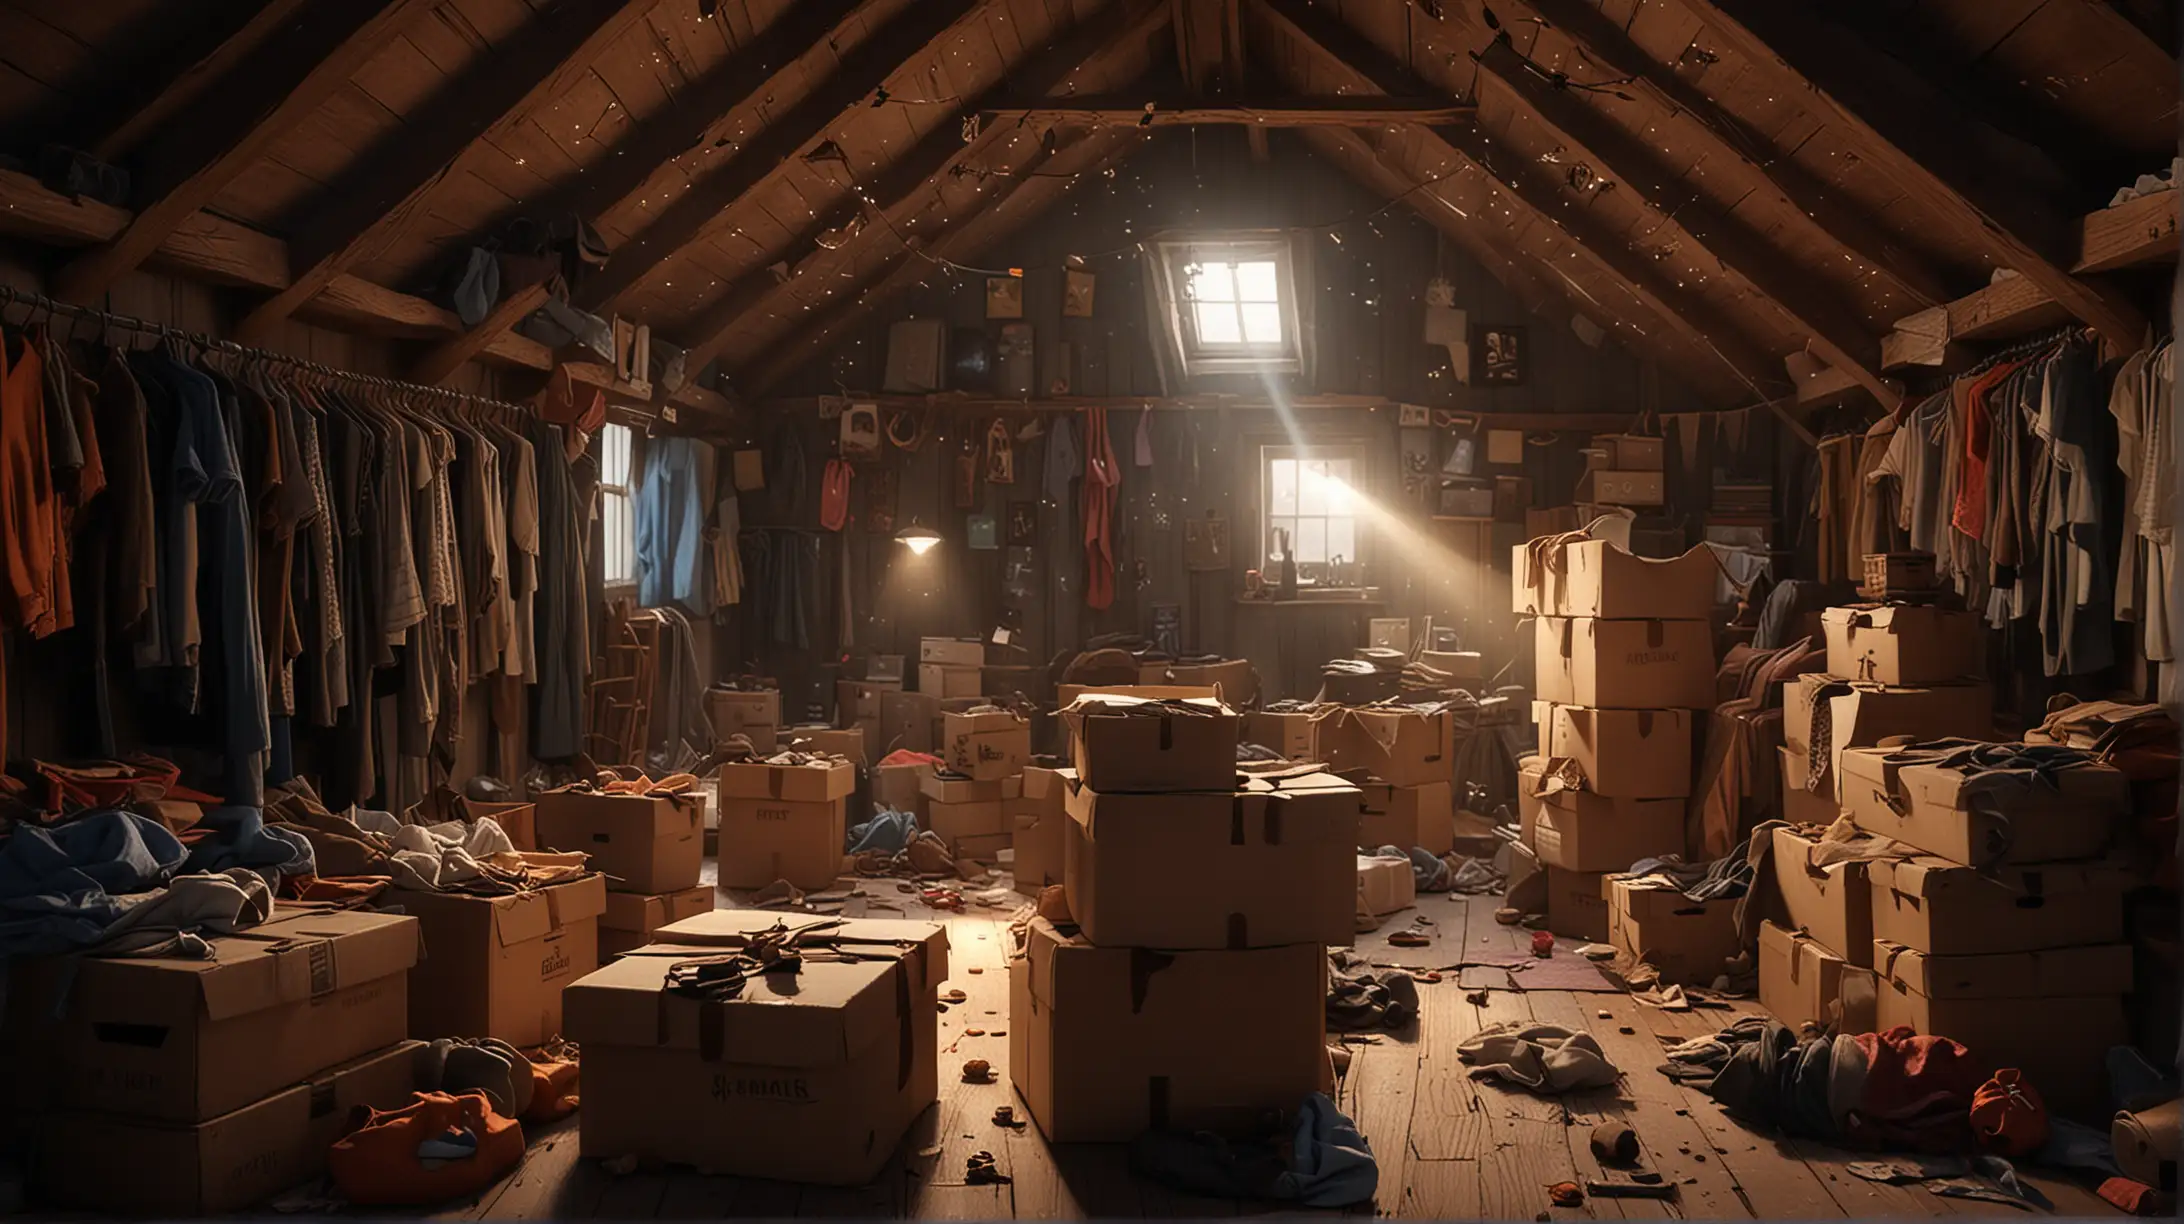 a spooky attic room full of clothes, boxes and paraphernalia  with beams of light coming in from holes in the roof pixar style
